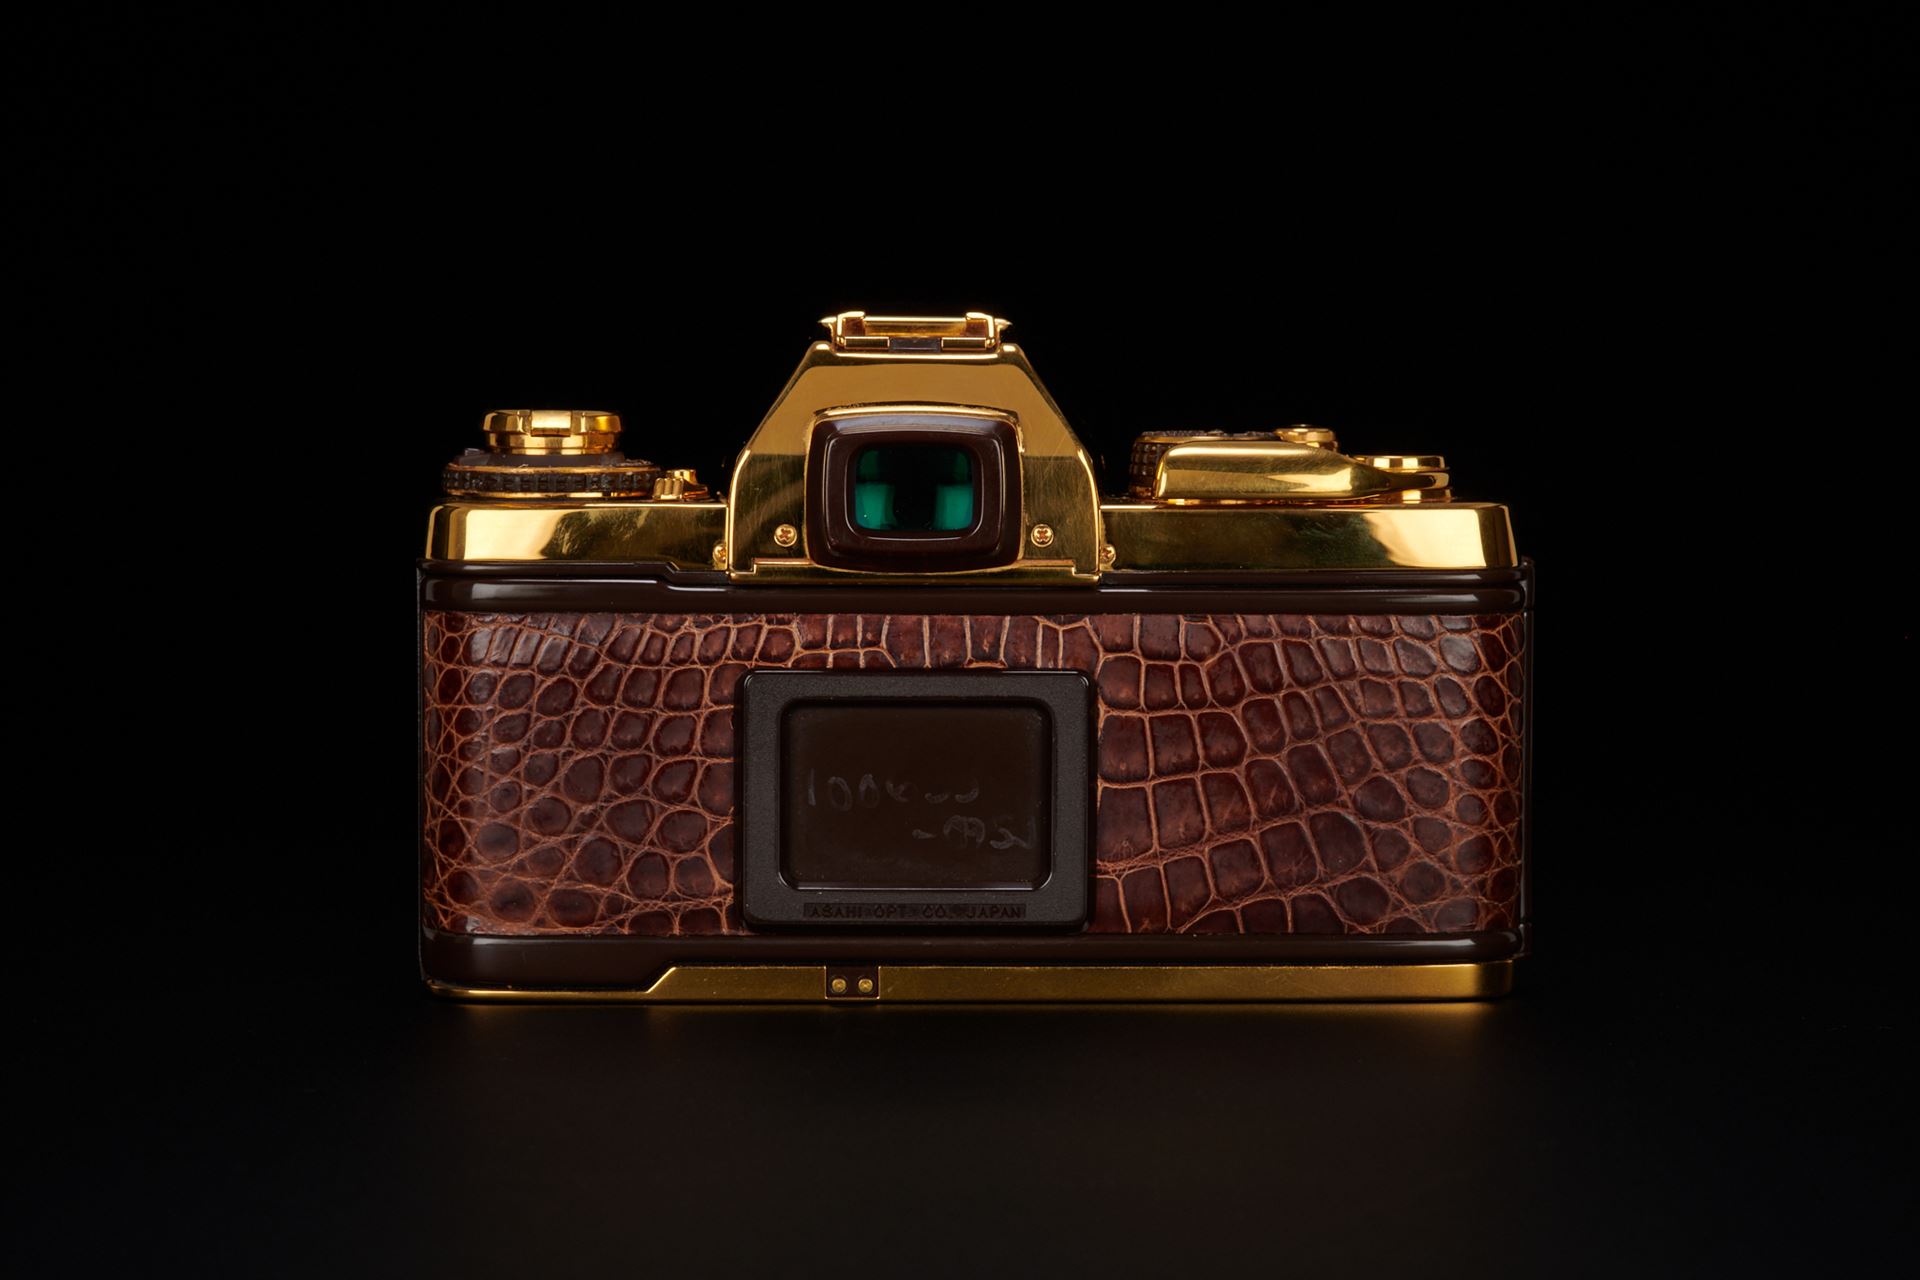 Picture of Asahi Pentax LX Gold